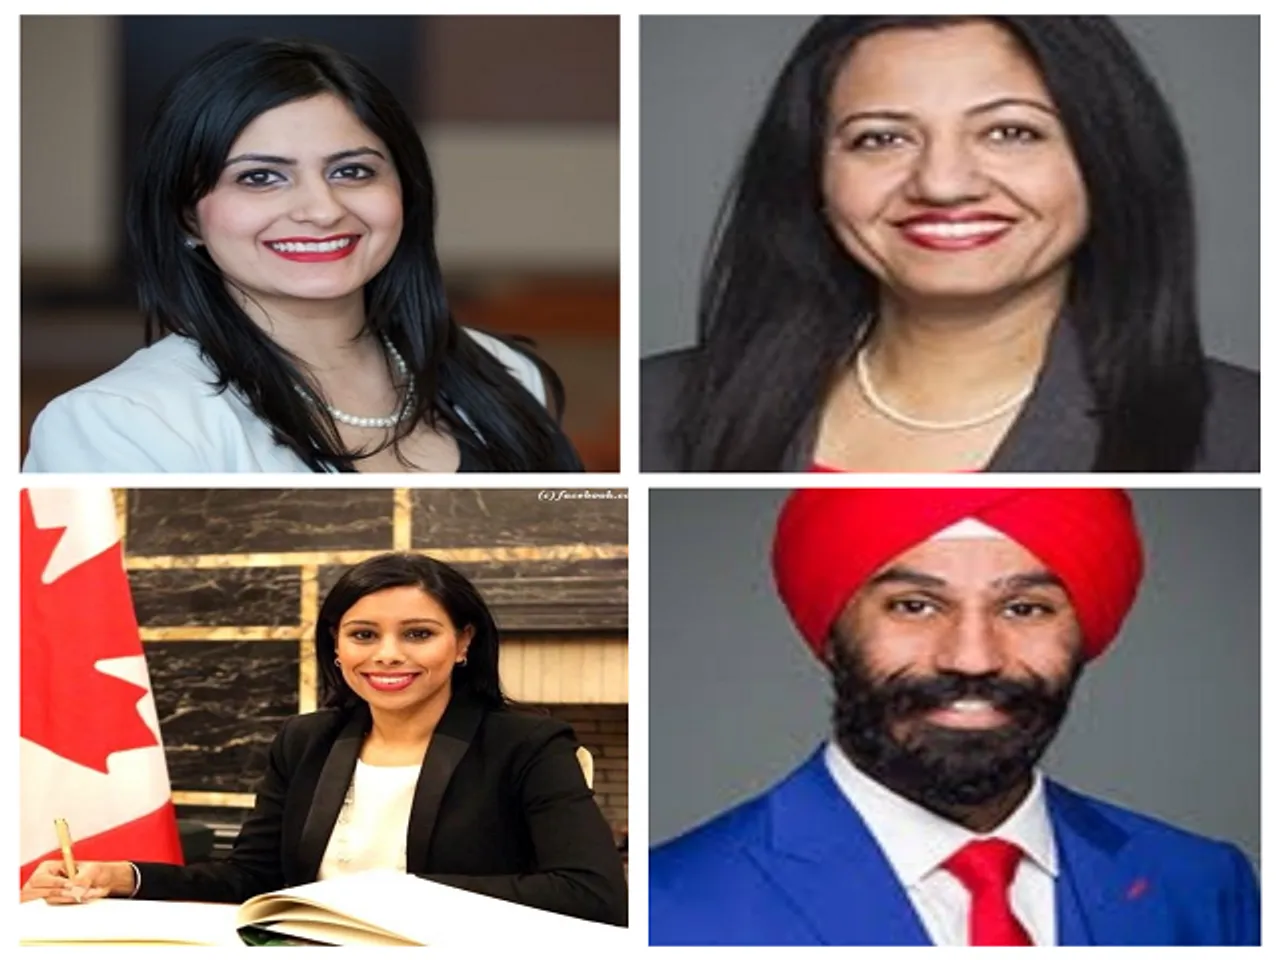 Statement released by Brampton MPs on incidents of violence involving youth in Brampton